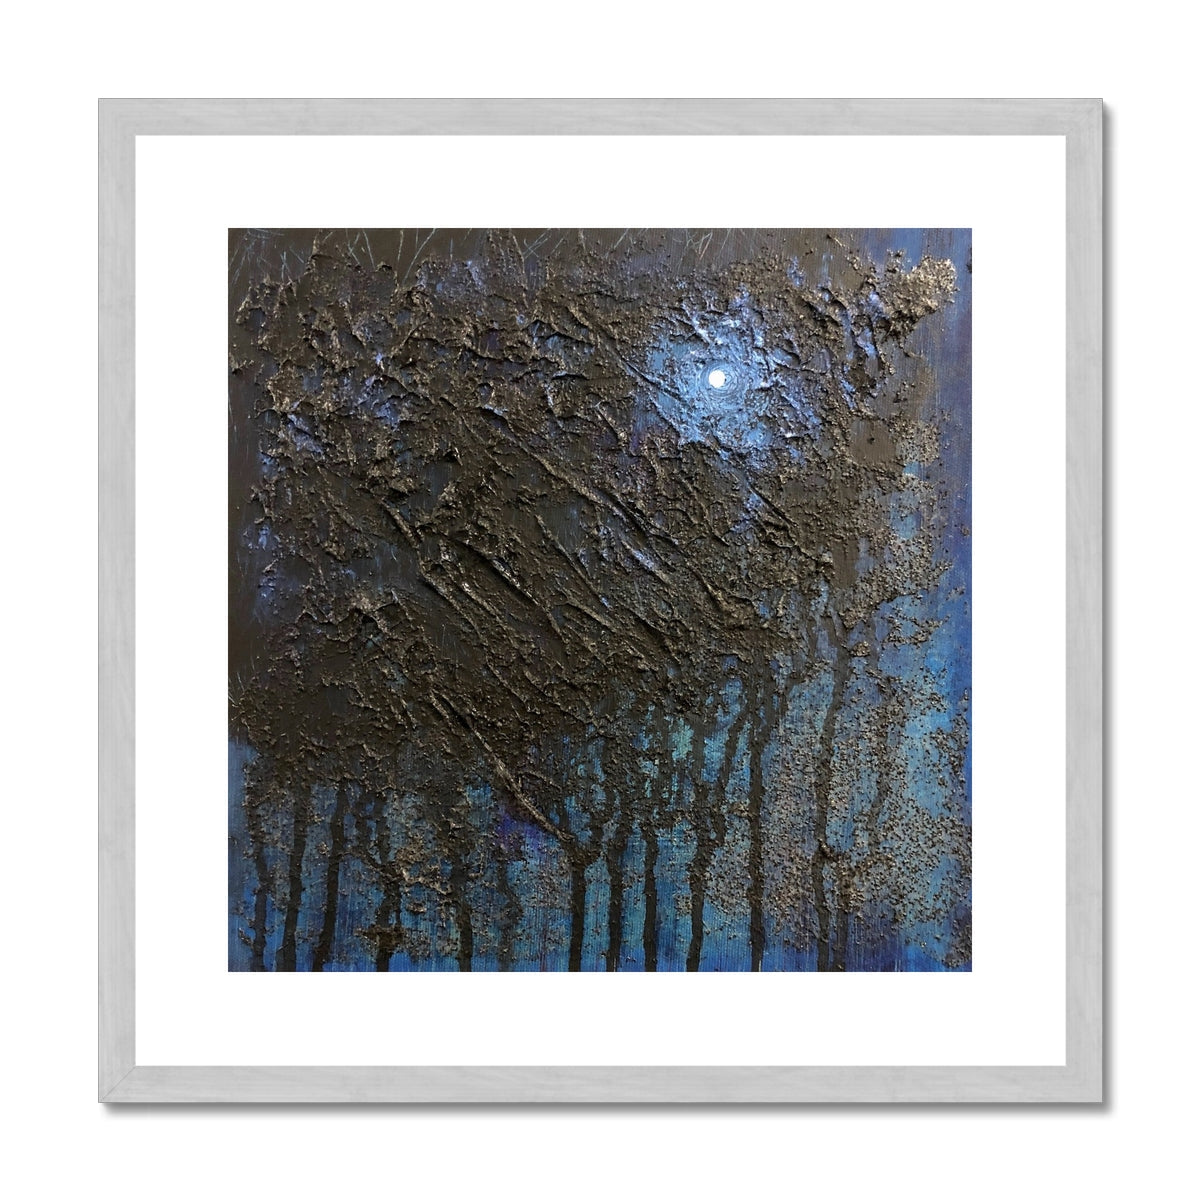 The Blue Moon Wood Abstract Painting | Antique Framed & Mounted Prints From Scotland-Antique Framed & Mounted Prints-Abstract & Impressionistic Art Gallery-20"x20"-Silver Frame-Paintings, Prints, Homeware, Art Gifts From Scotland By Scottish Artist Kevin Hunter